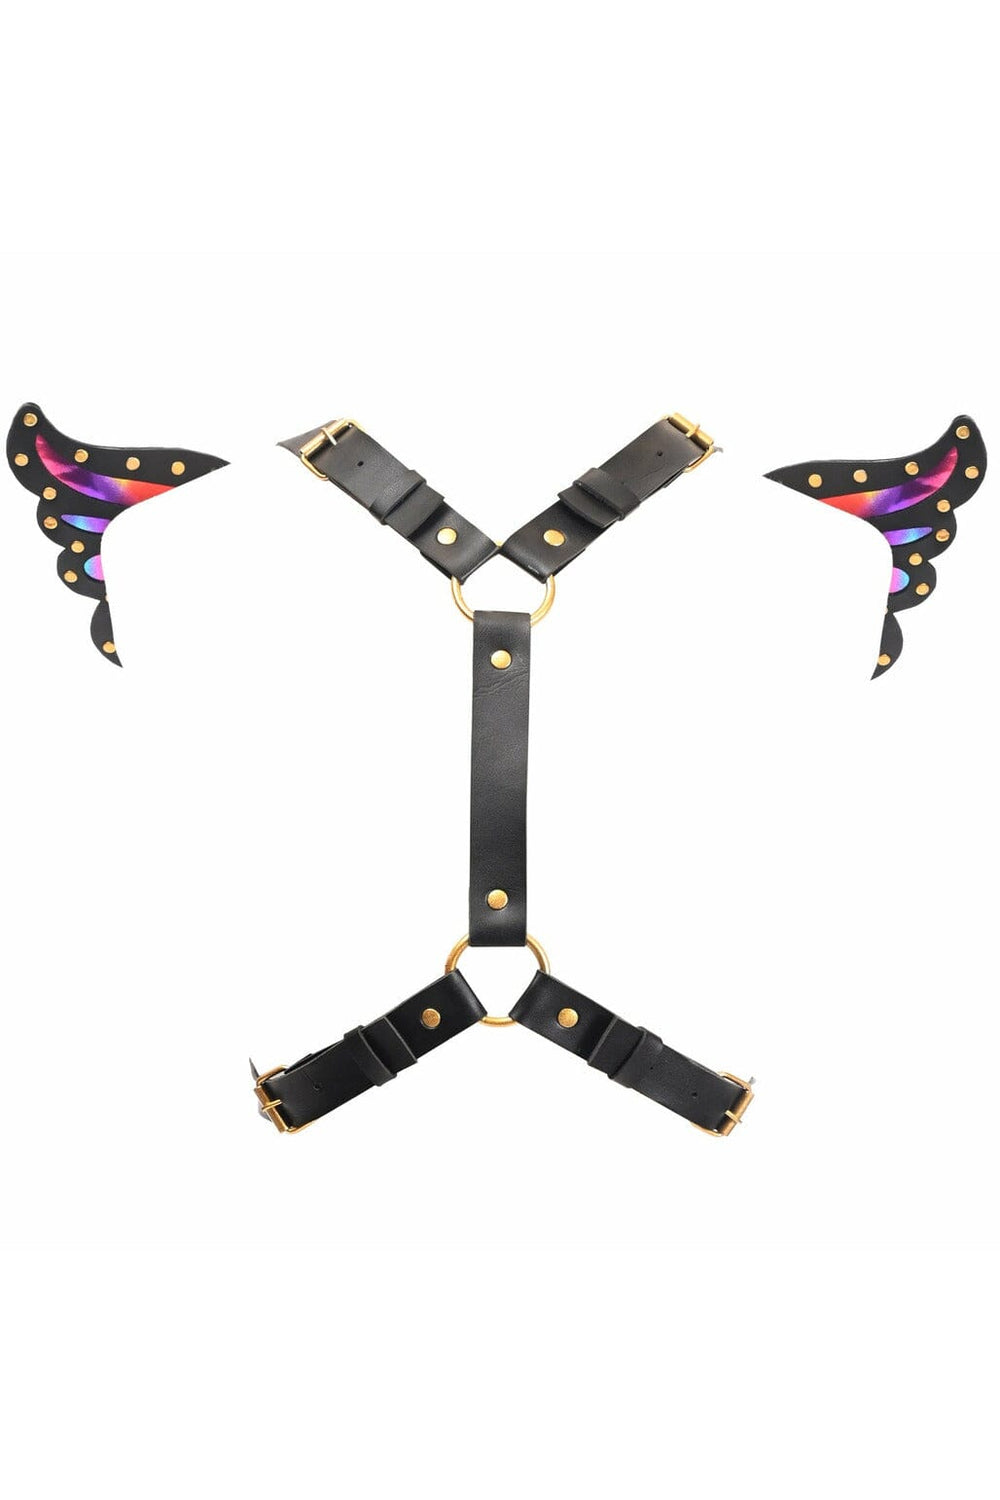 Black Faux Leather & Rainbow Holo Butterfly Wing Harness-Wings + Harness-Daisy Corsets-SEXYSHOES.COM